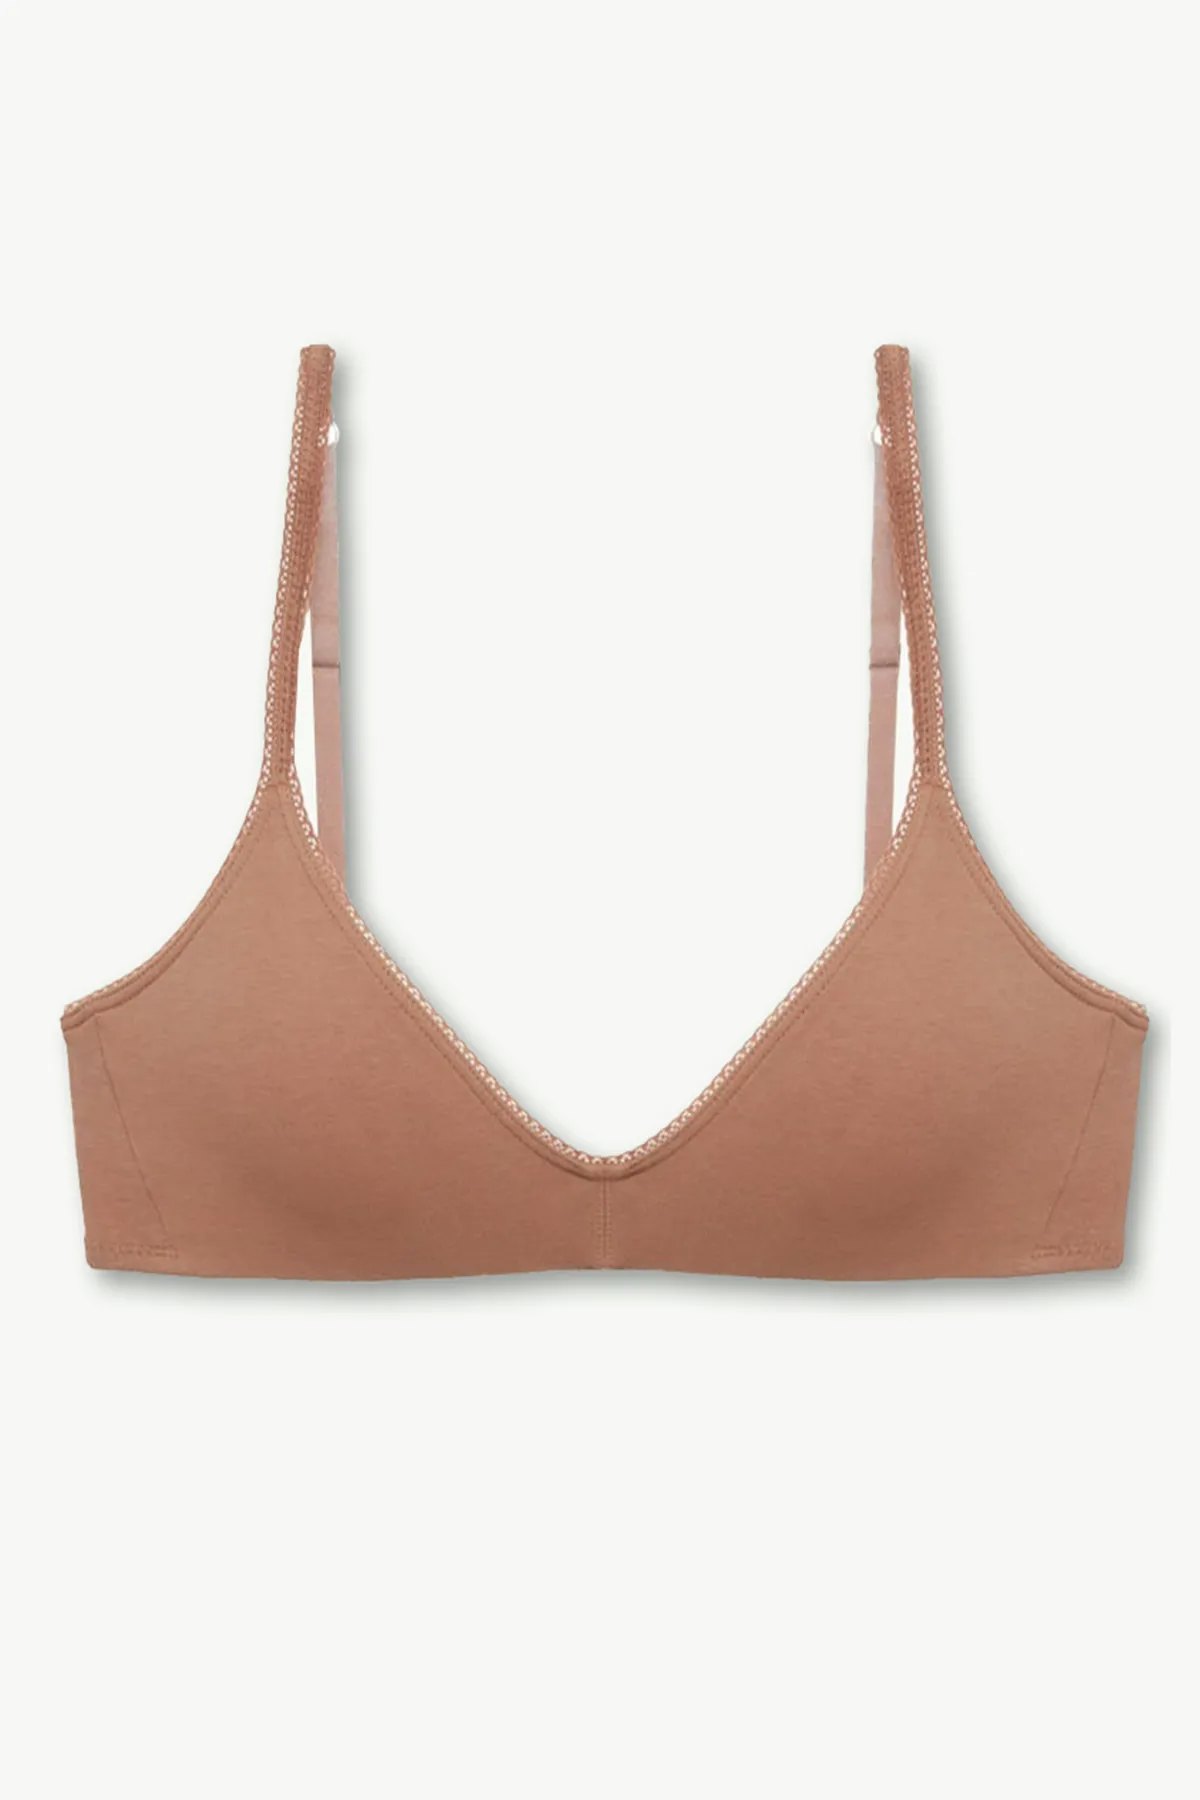 Does Pepper Have the Best Bras for Small Boobs? We Investigated!